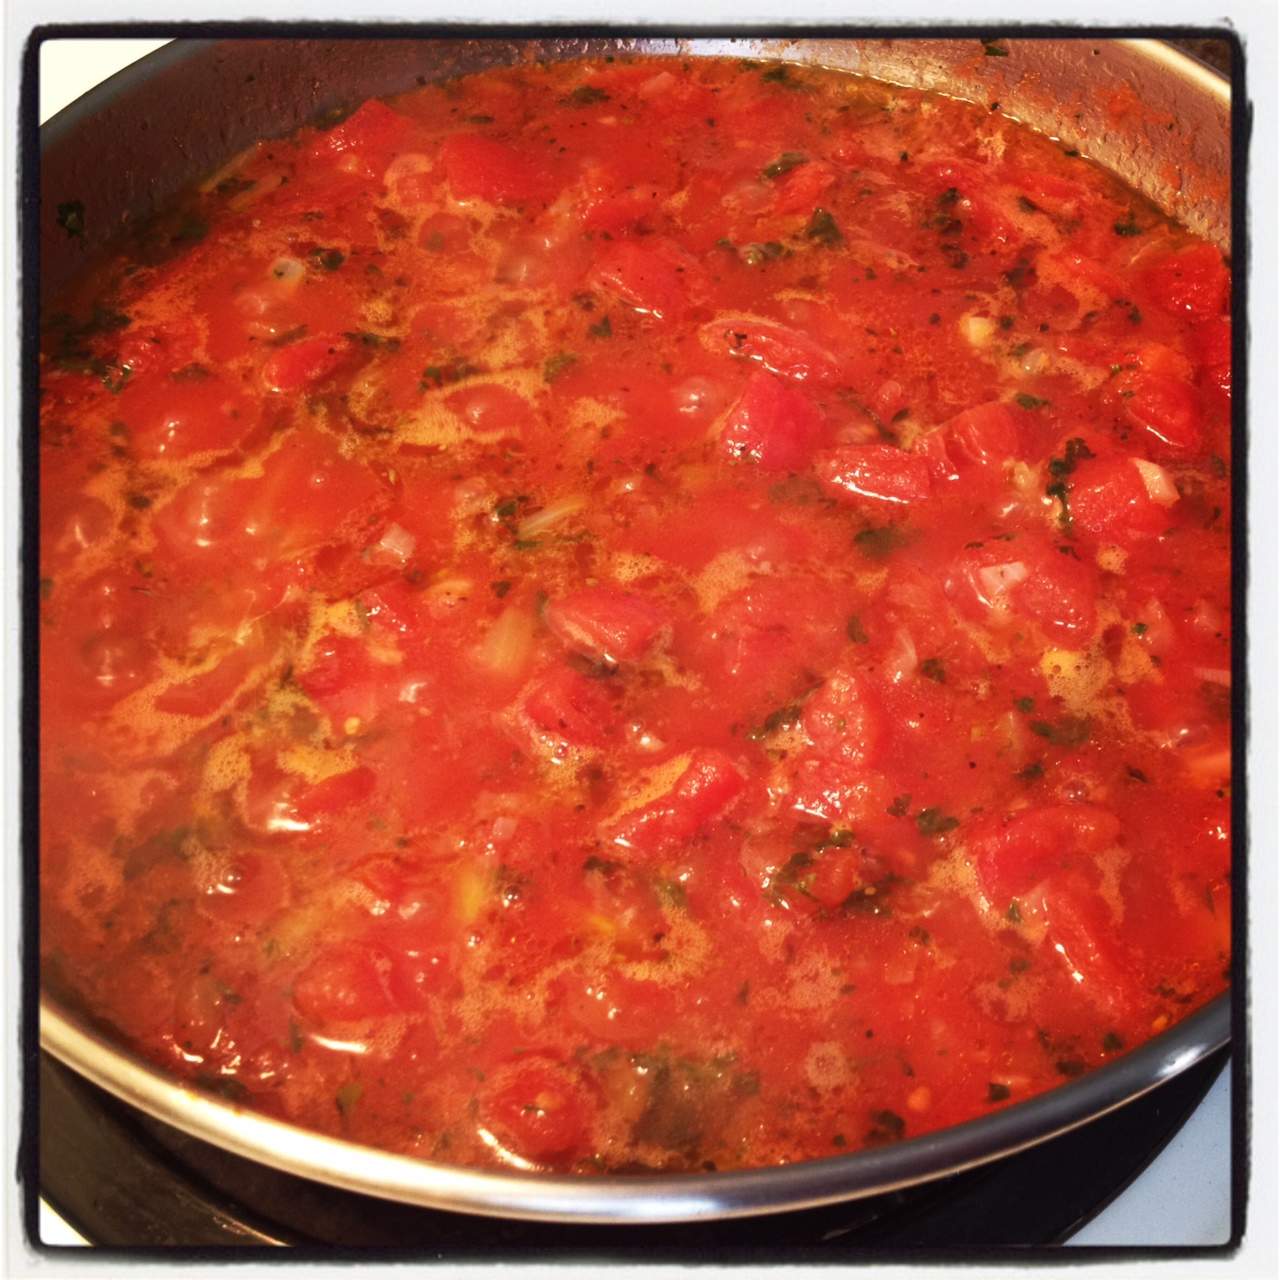 Homemade tomato sauce in a pan freezer meals